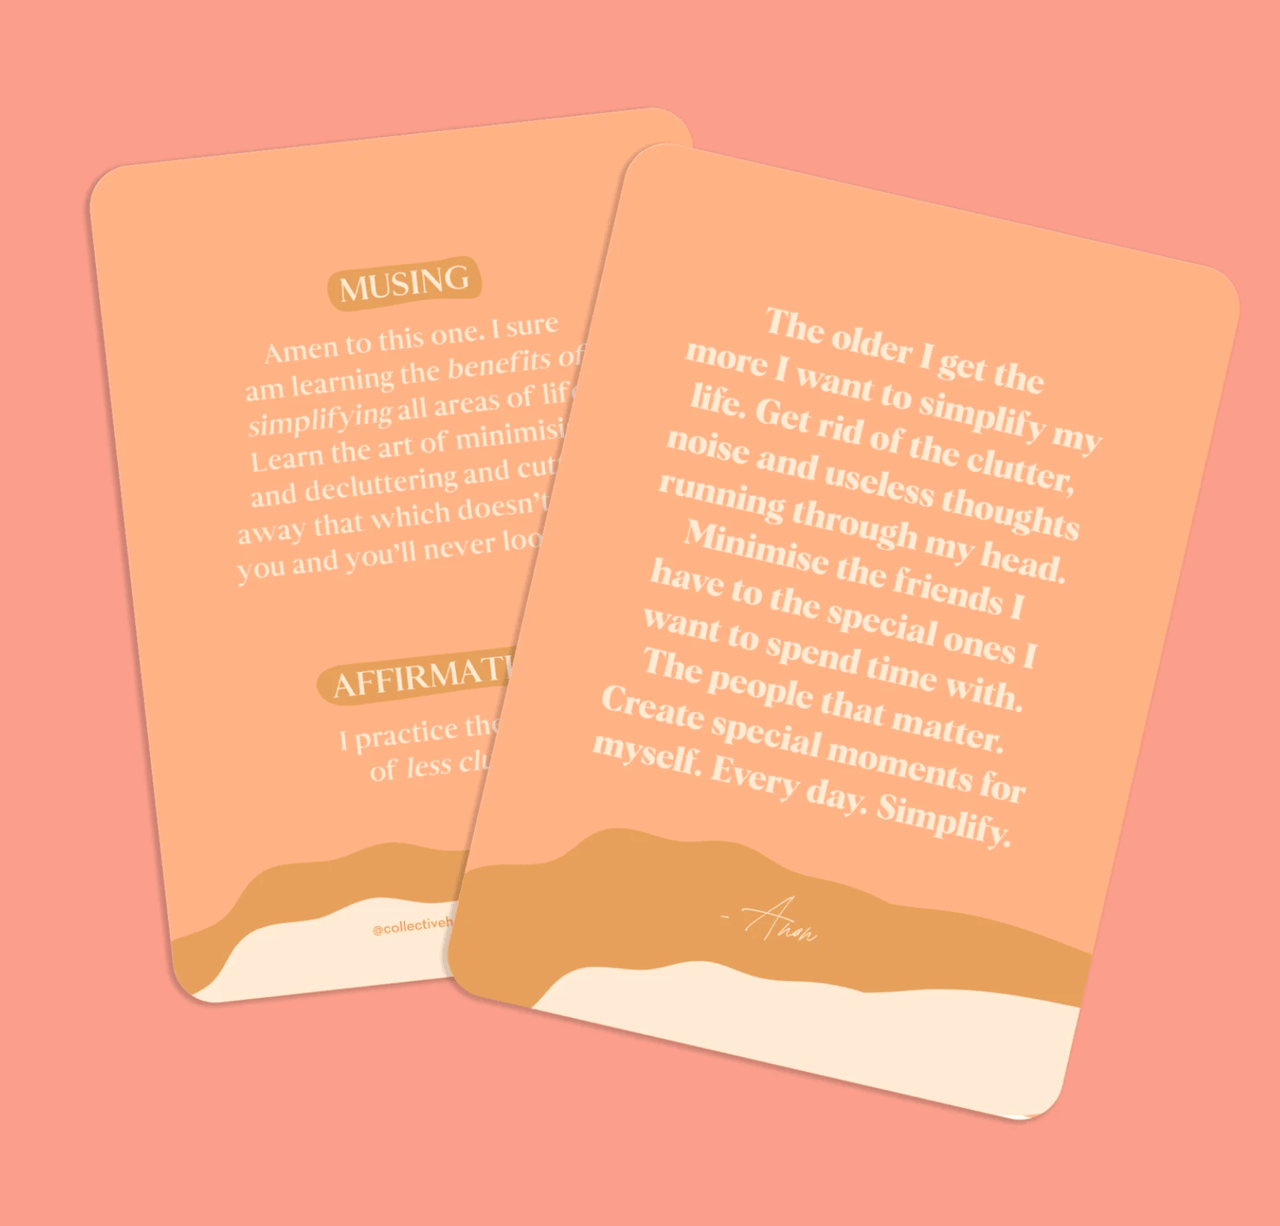 A set of Affirmations to Guide Your Journey - Box Card Set cards by Collective Hub with a quote on them.